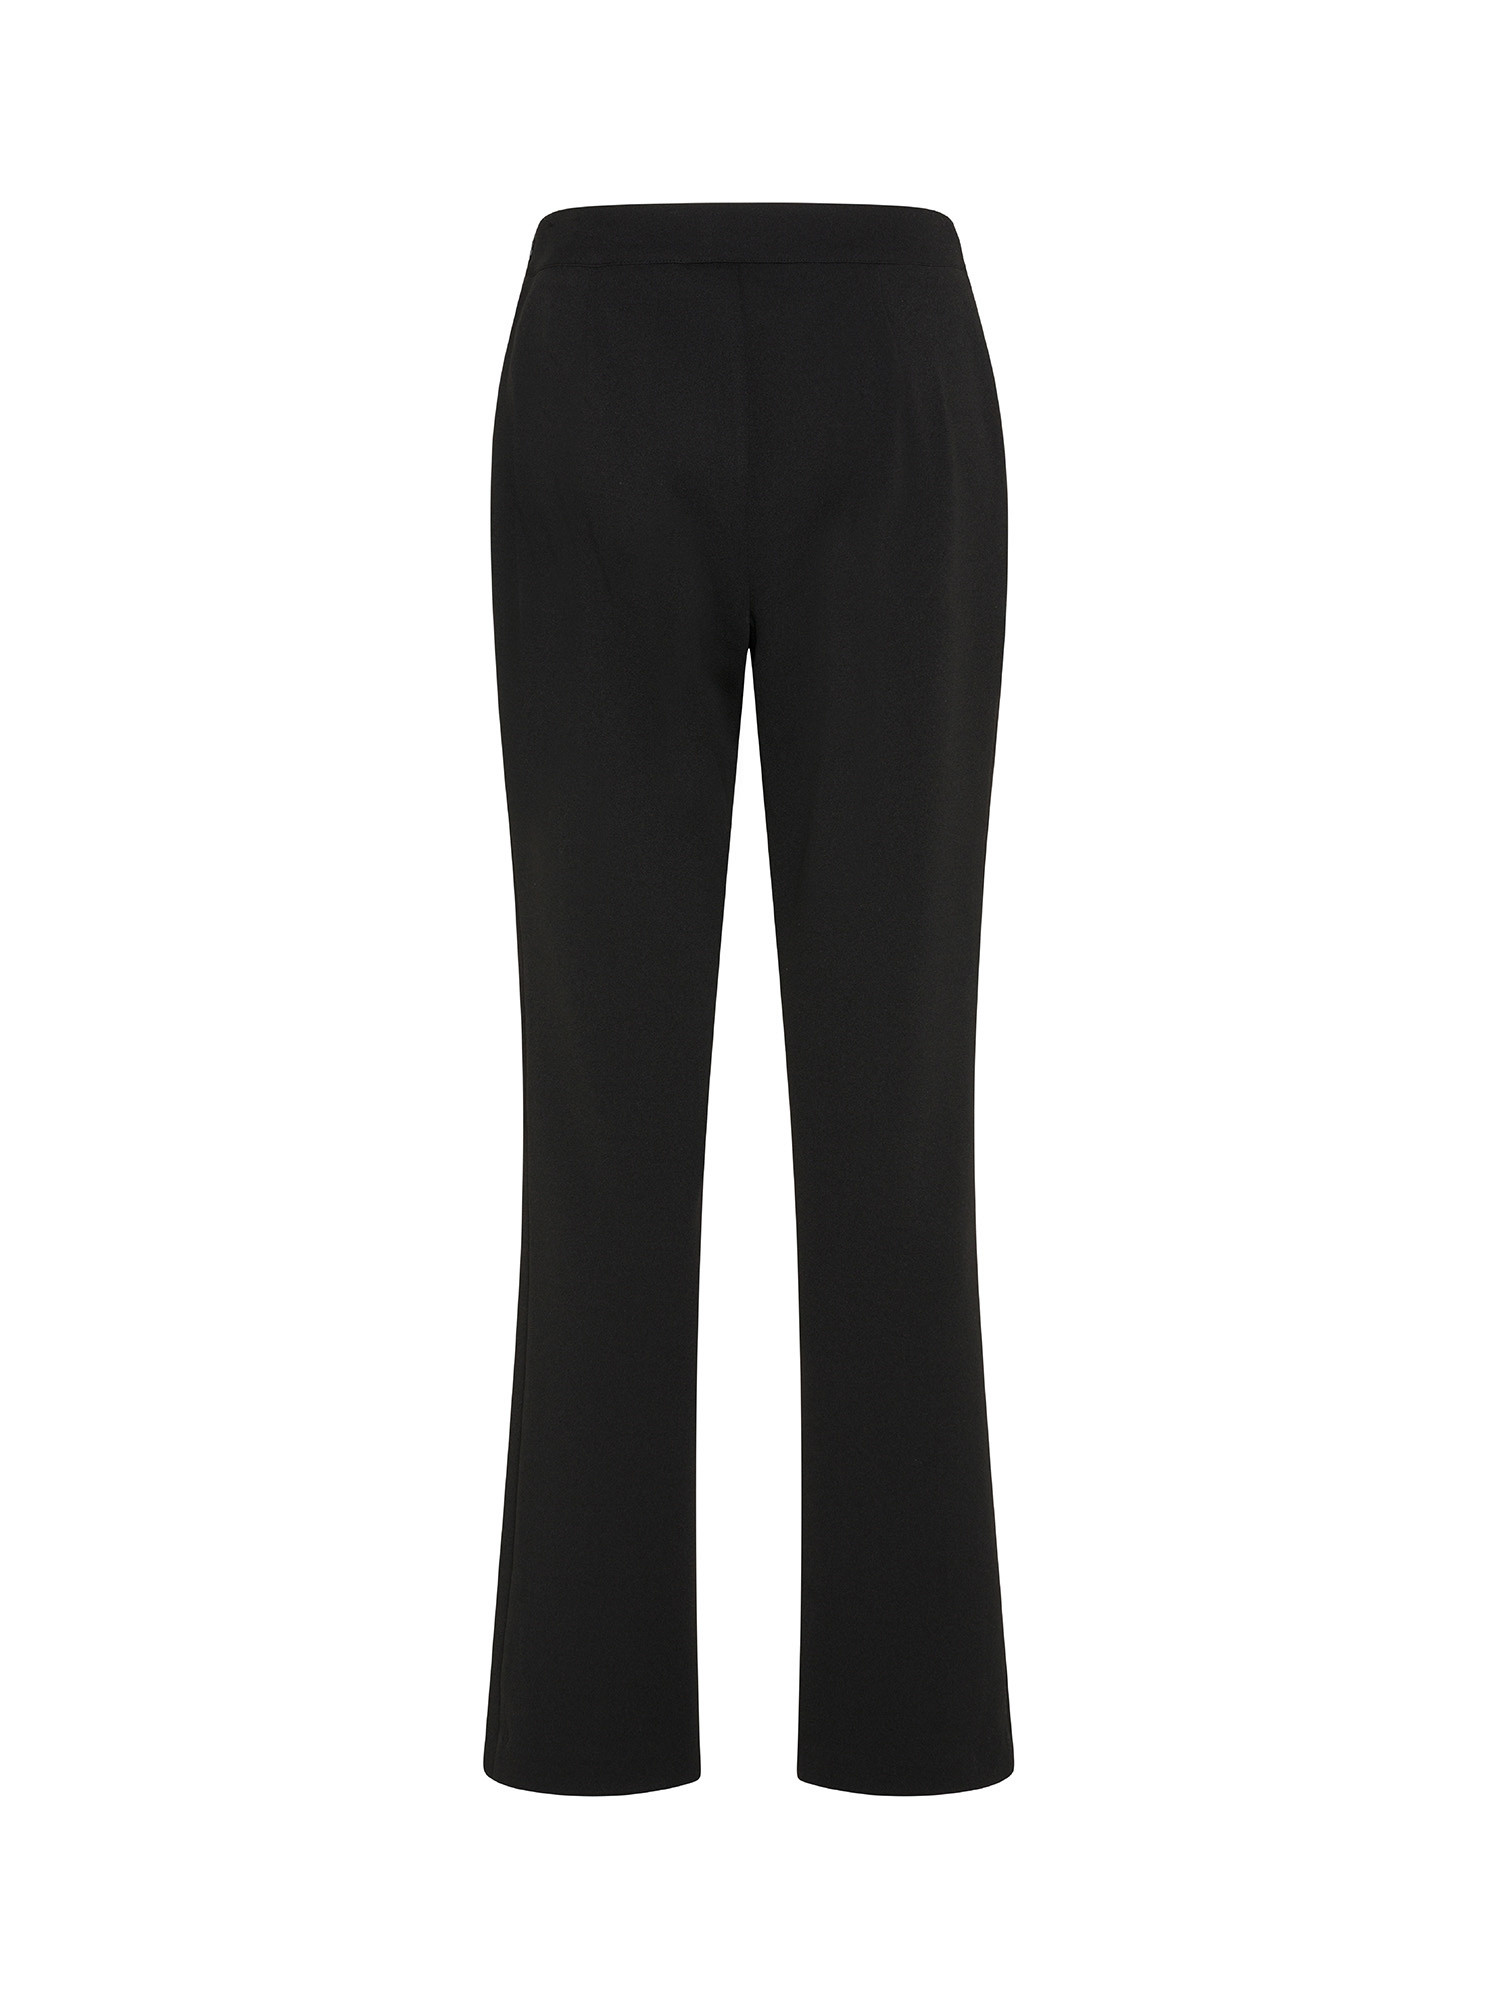 Koan - Crepe trousers with slits, Black, large image number 1